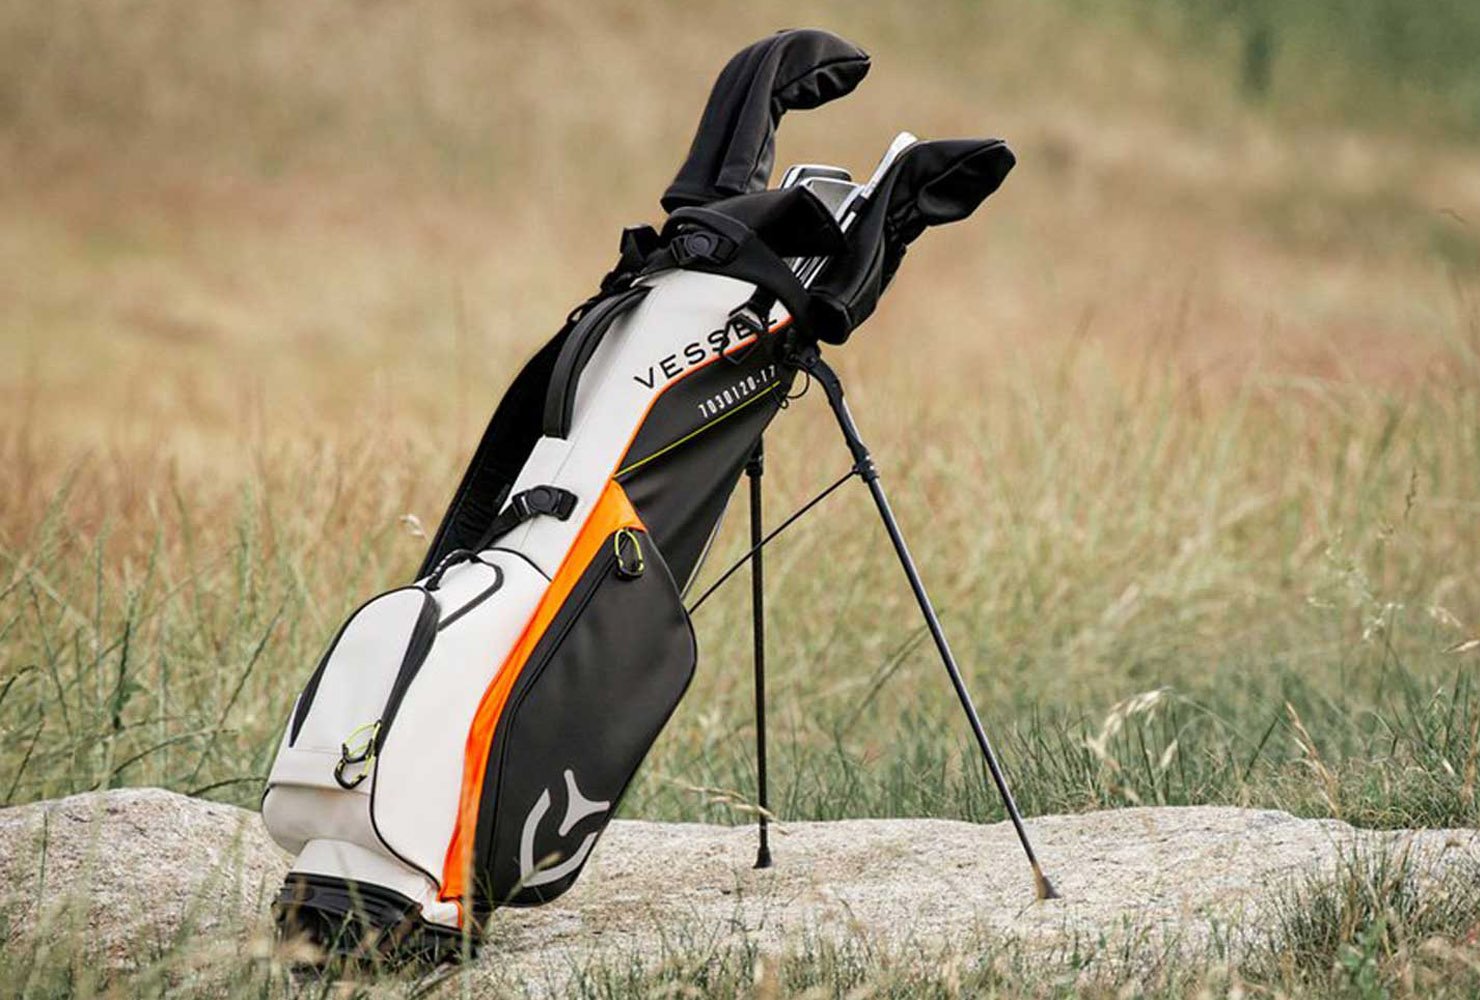 Vessel VLX Golf Bag - The Hackers Paradise